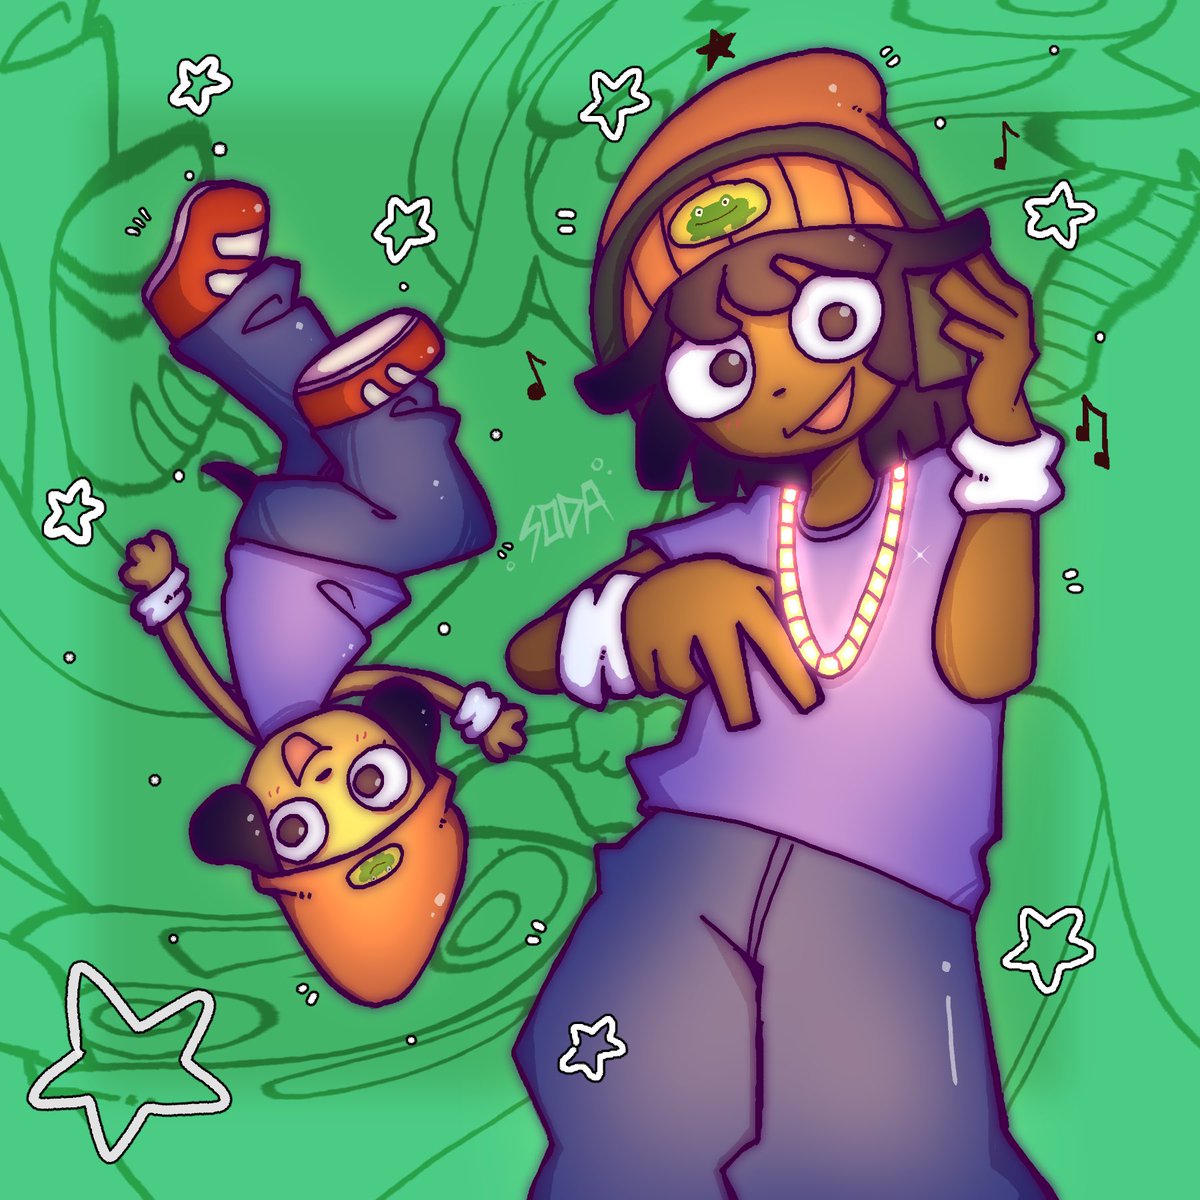 Such an awesome design! I love him!
#ParappatheRapper #parappa